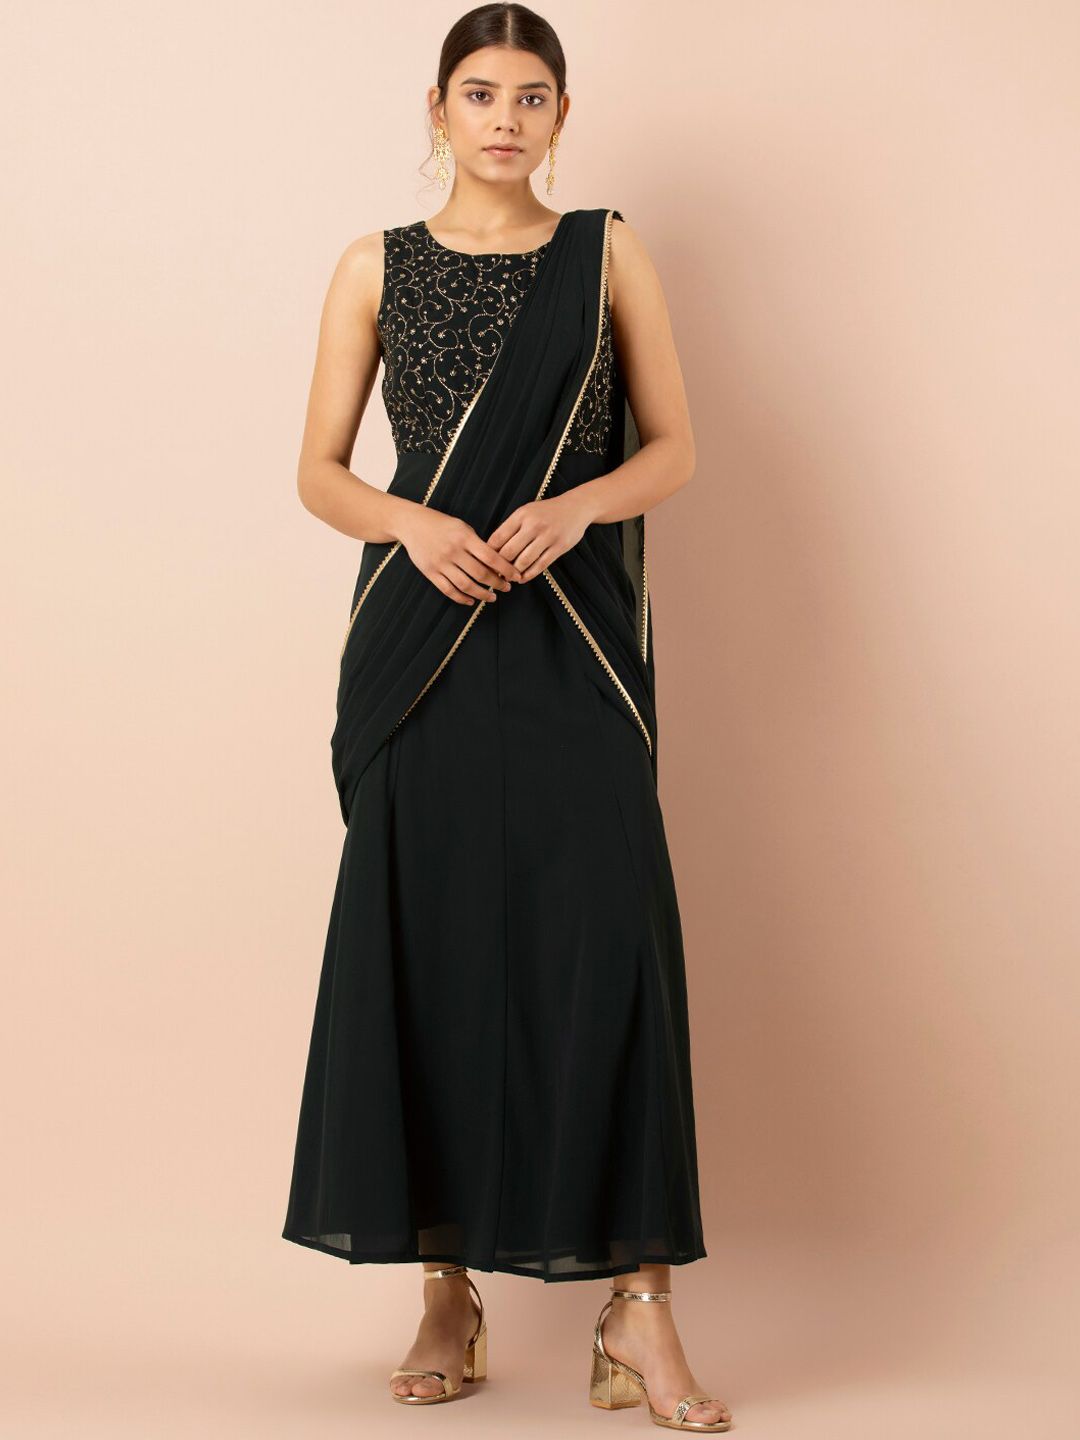 INDYA Black Embroidered Fish Cut Kalidar Kurta with Attached Dupatta Price in India